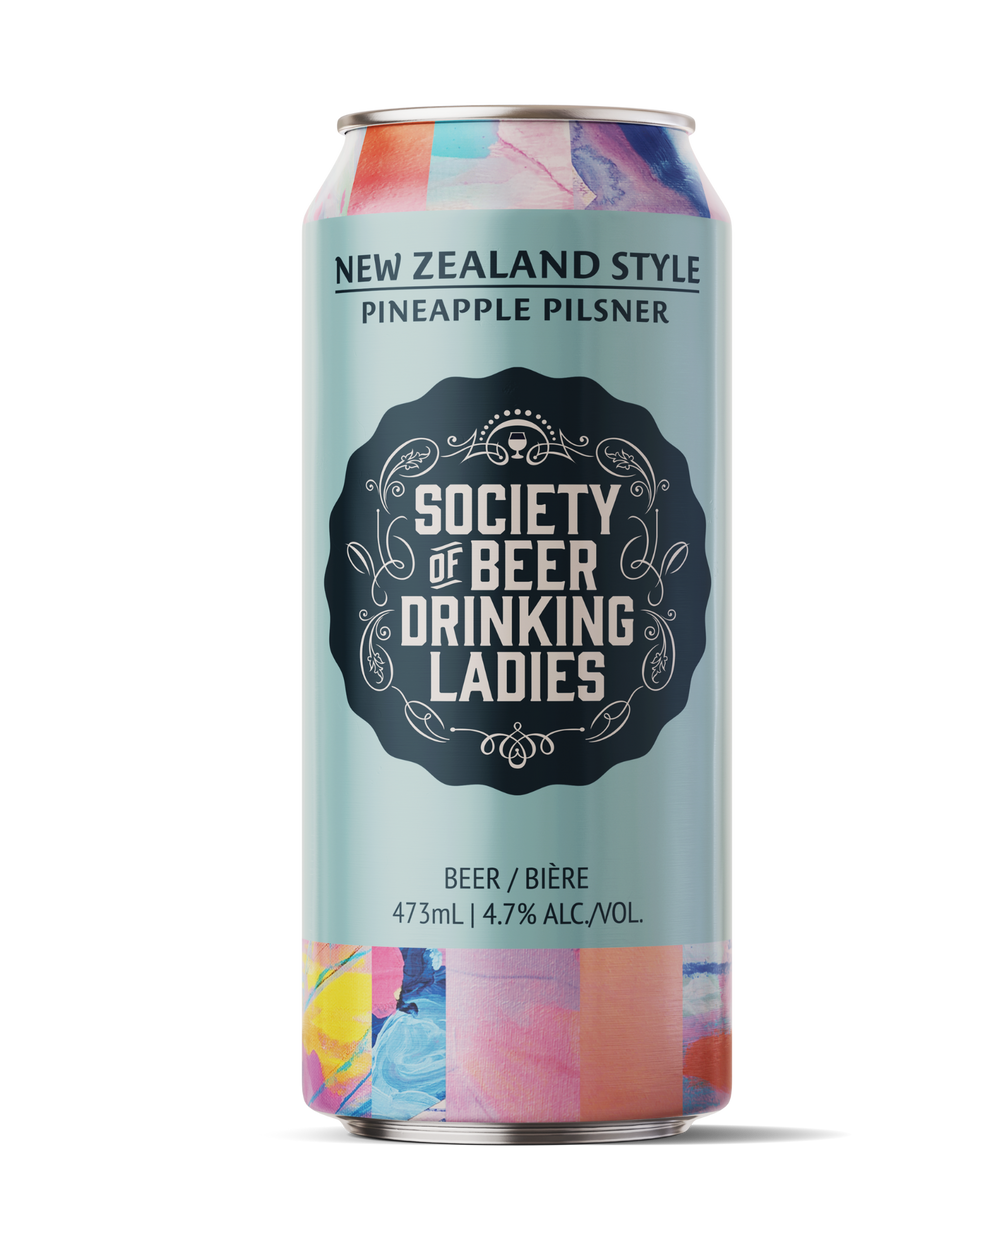 New Zealand Style Pineapple Pilsner - Single Can 6 Pack Price